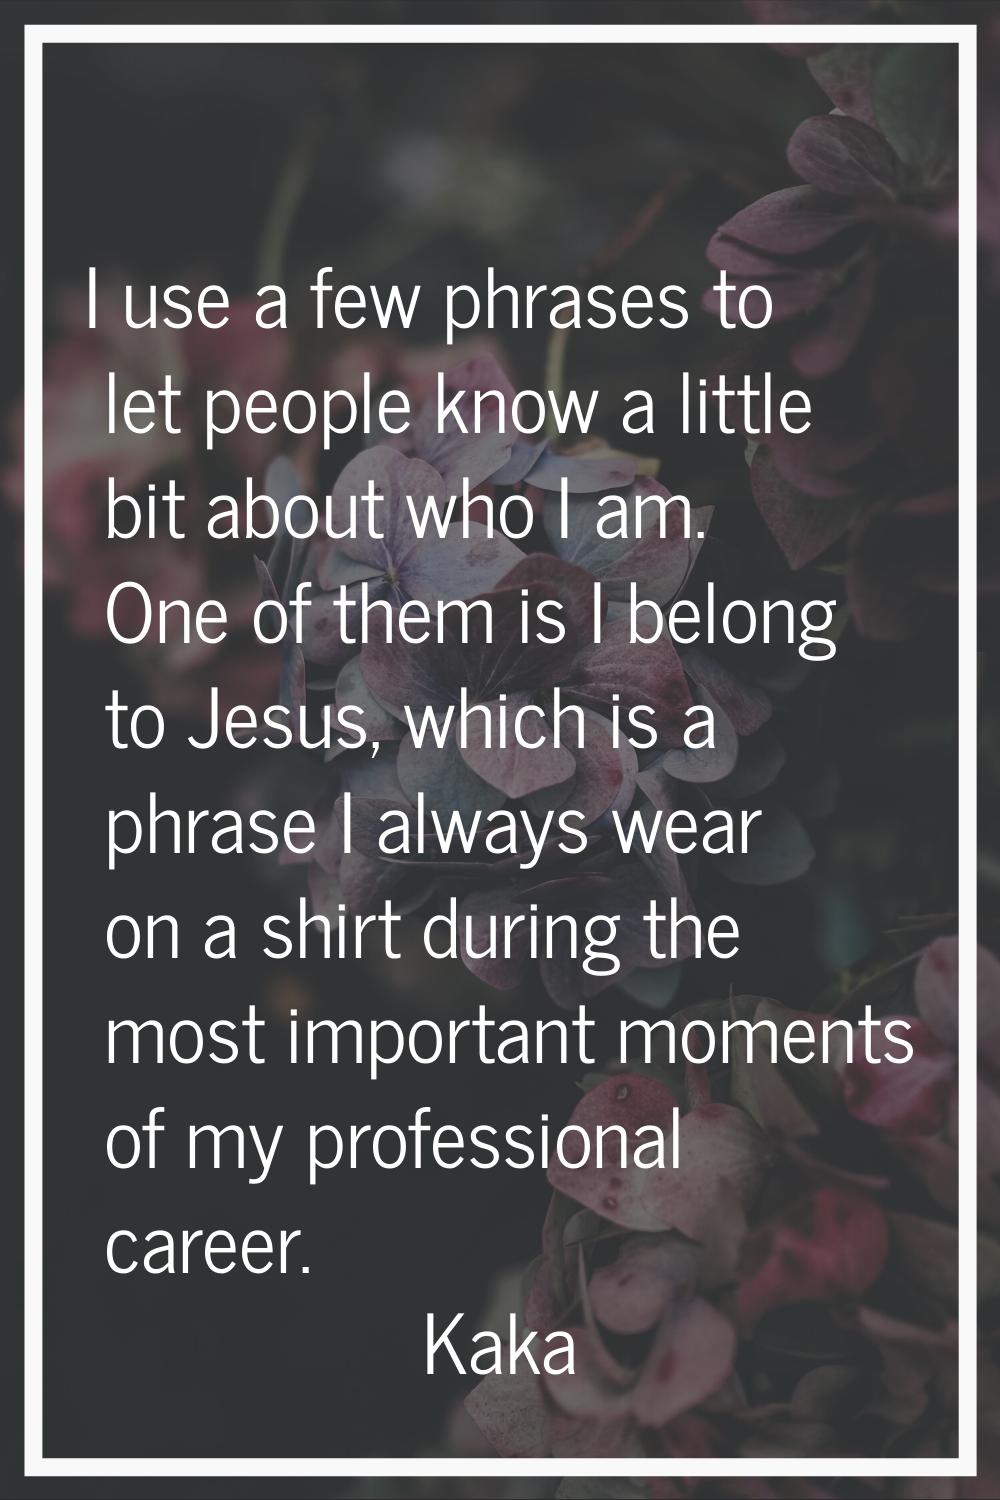 I use a few phrases to let people know a little bit about who I am. One of them is I belong to Jesu